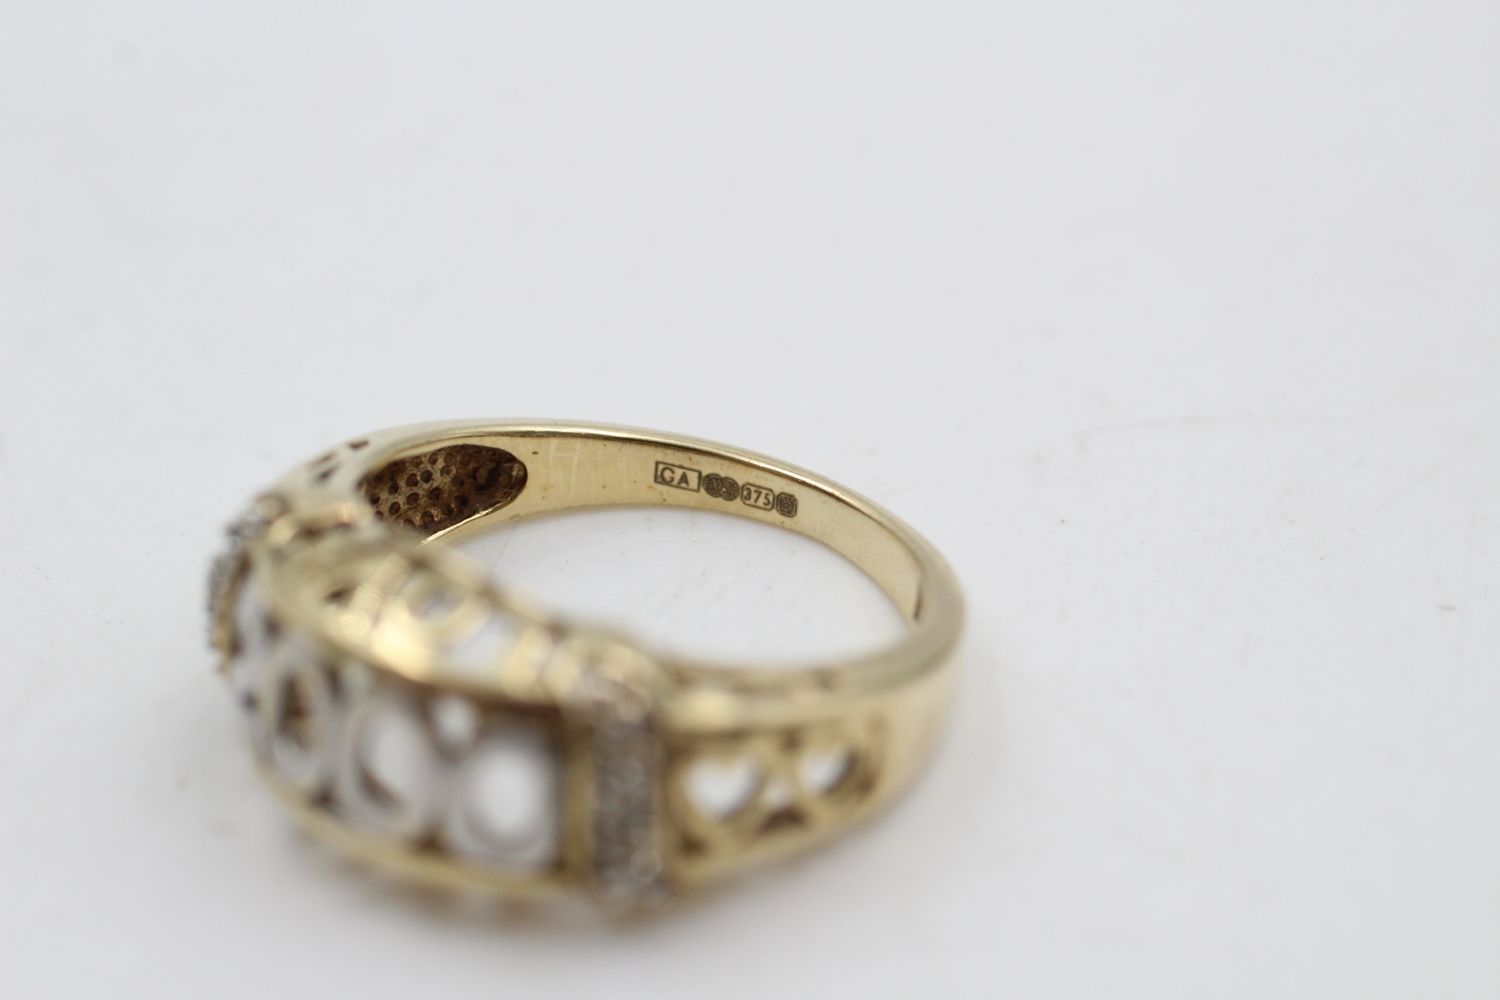 vintage 9ct gold two-tone '2000' cutwork ring 2.3 grams gross - Image 5 of 5